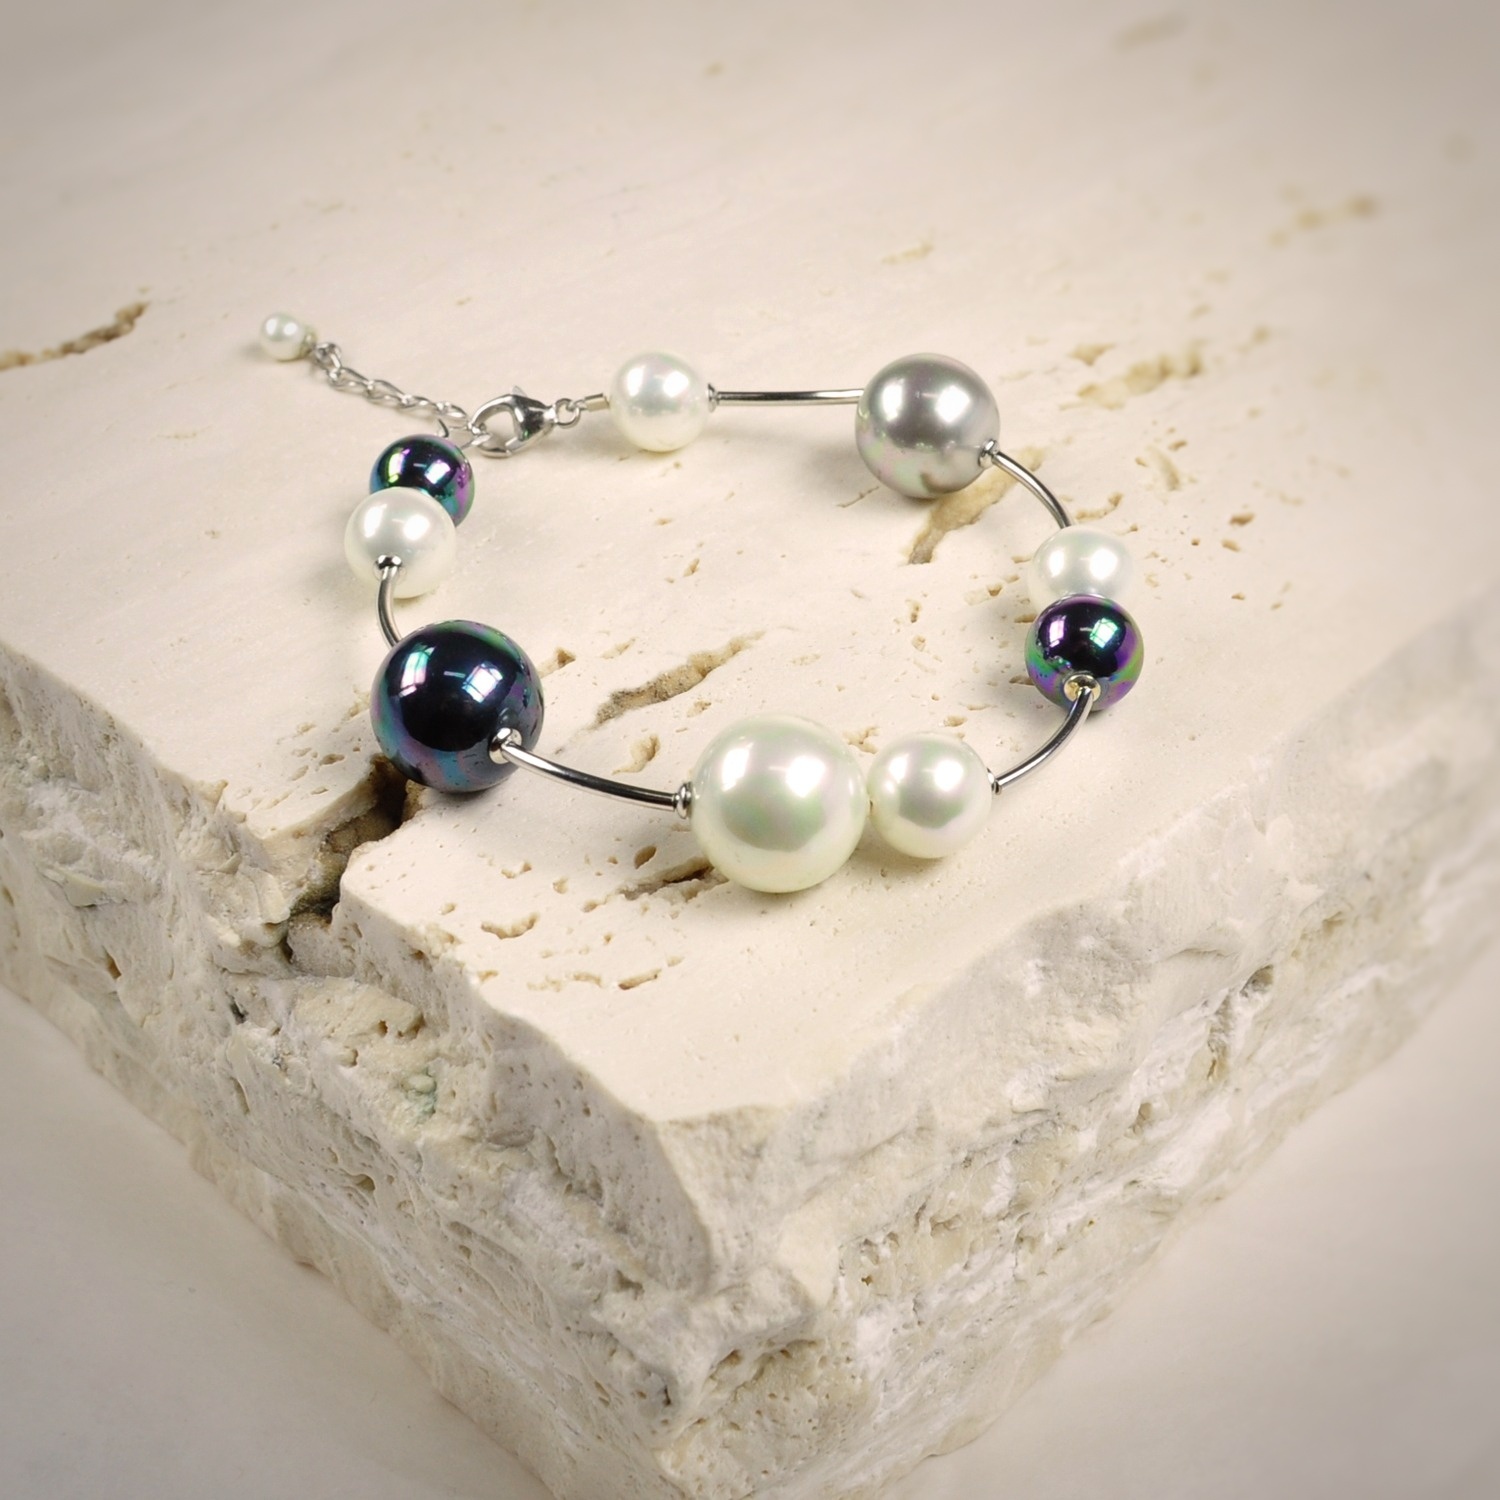 Bracelet with White, Grey and Black pearls 1